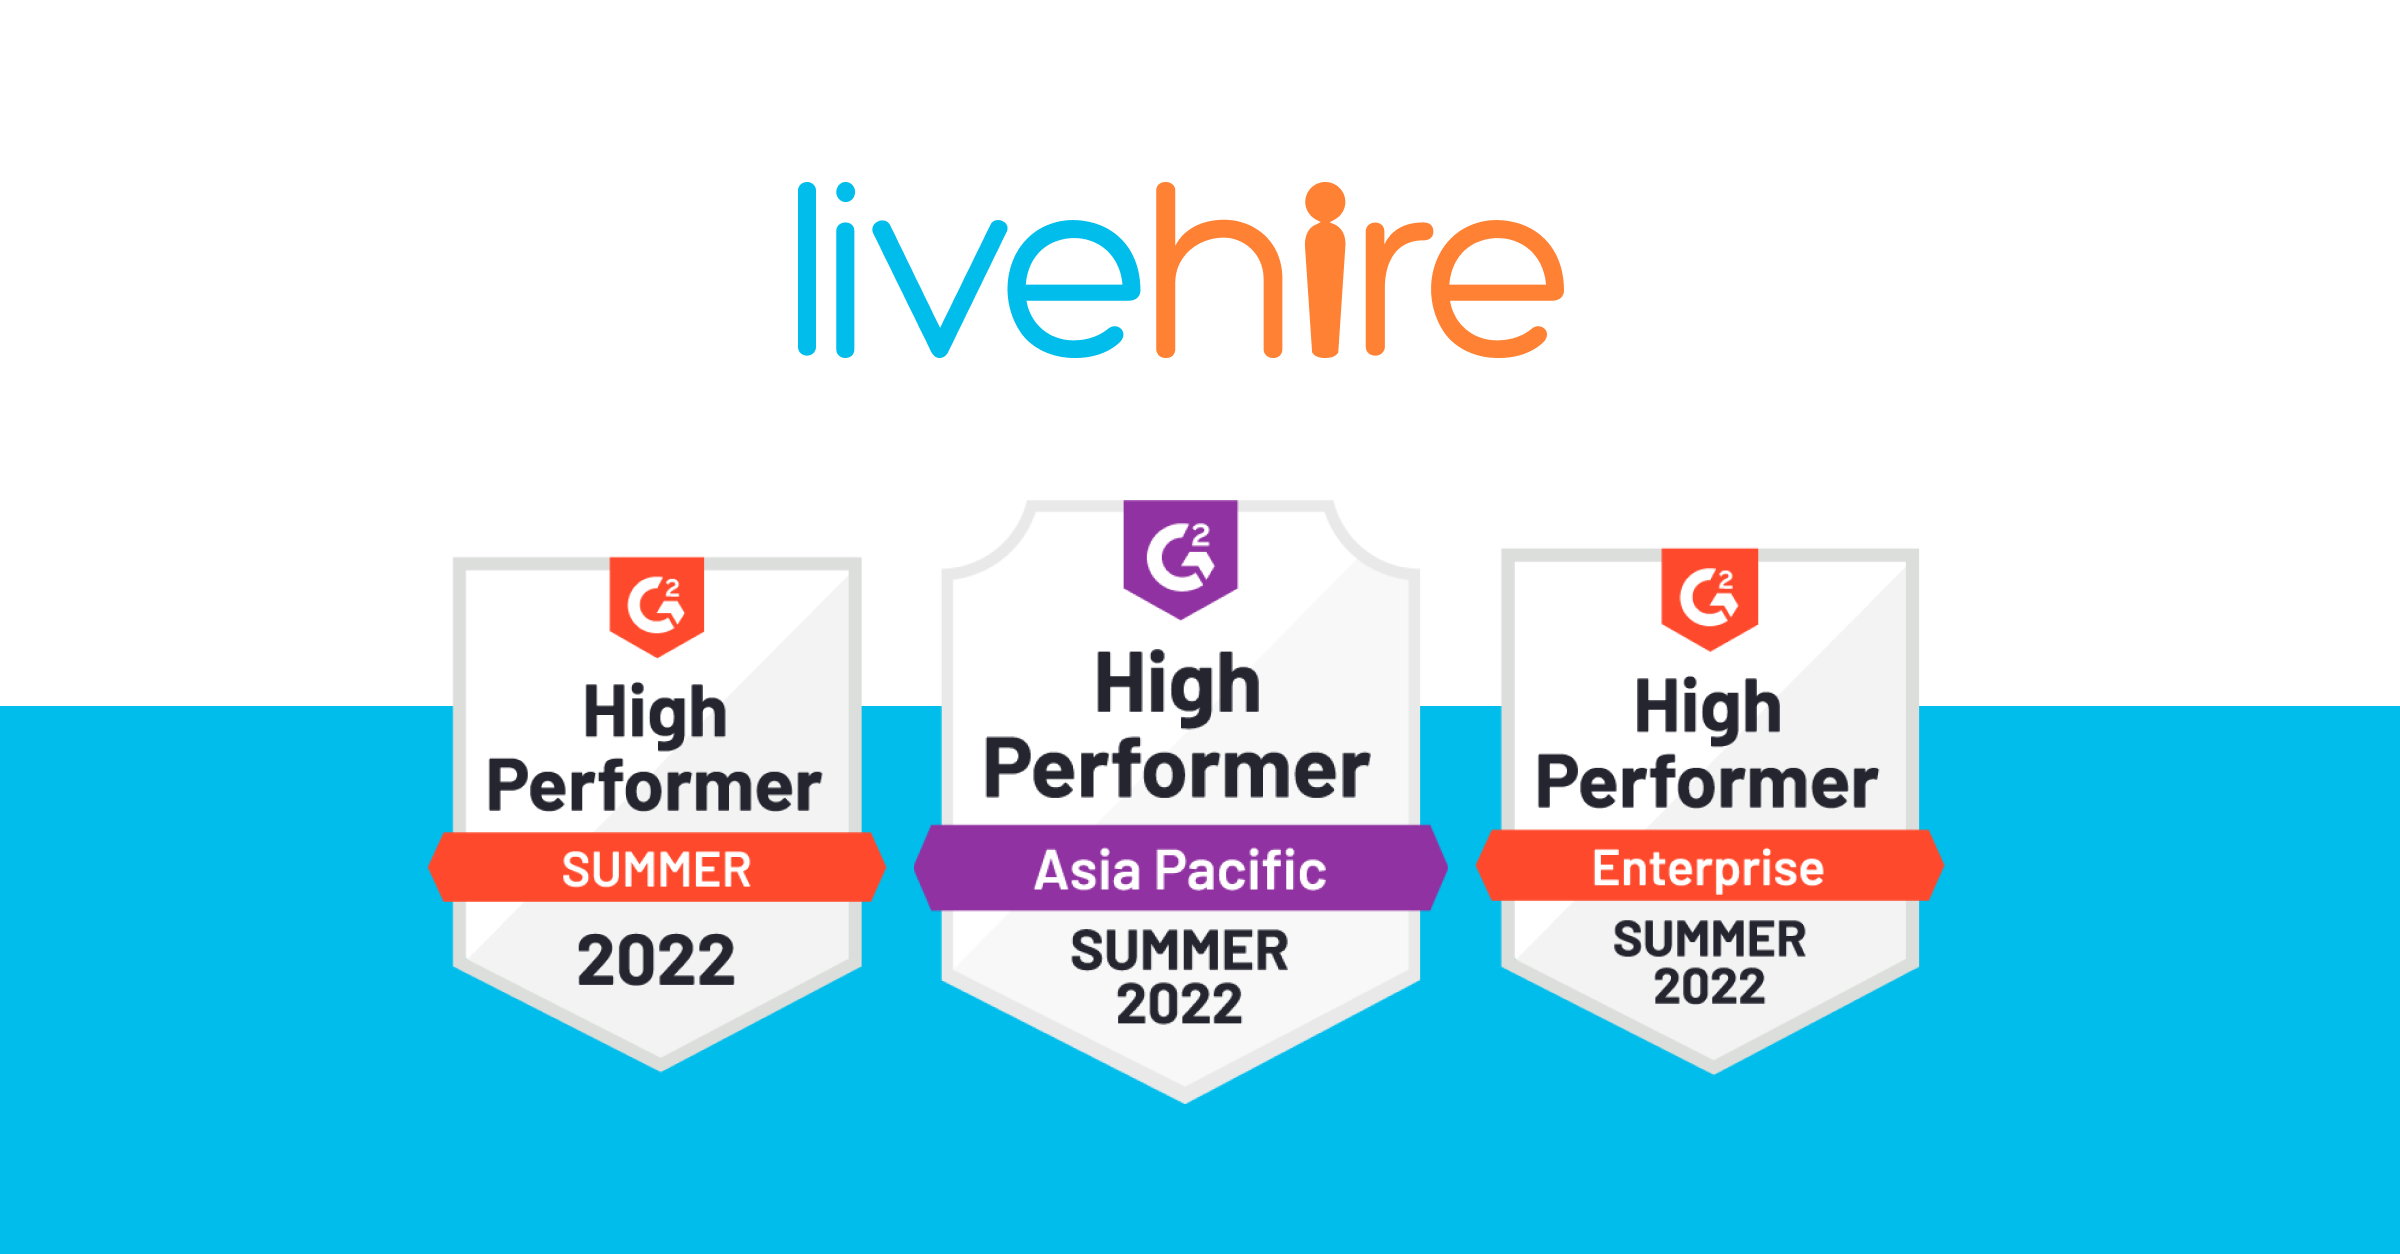 LiveHire named High Performer Enterprise Applicant Tracking System by G2 Grid Reports